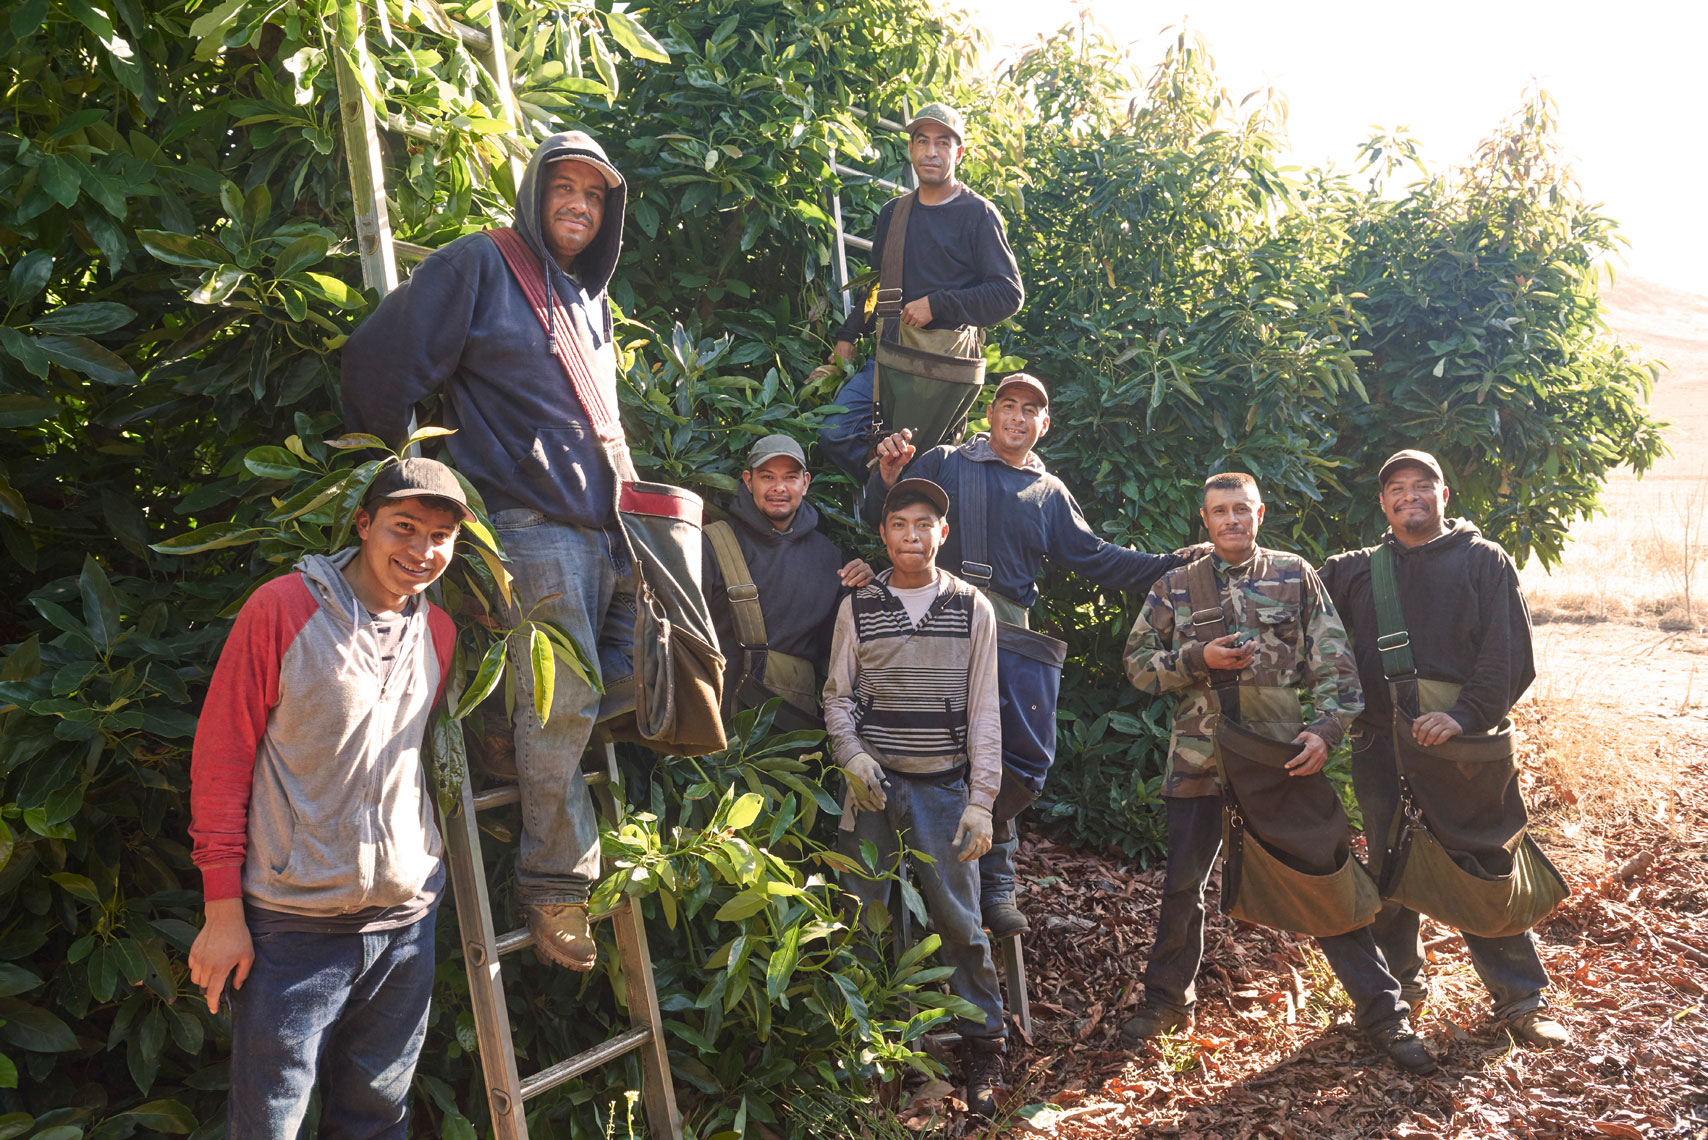 Group-environmental-portrait-photography-of-avocado-pickers-in-orchard